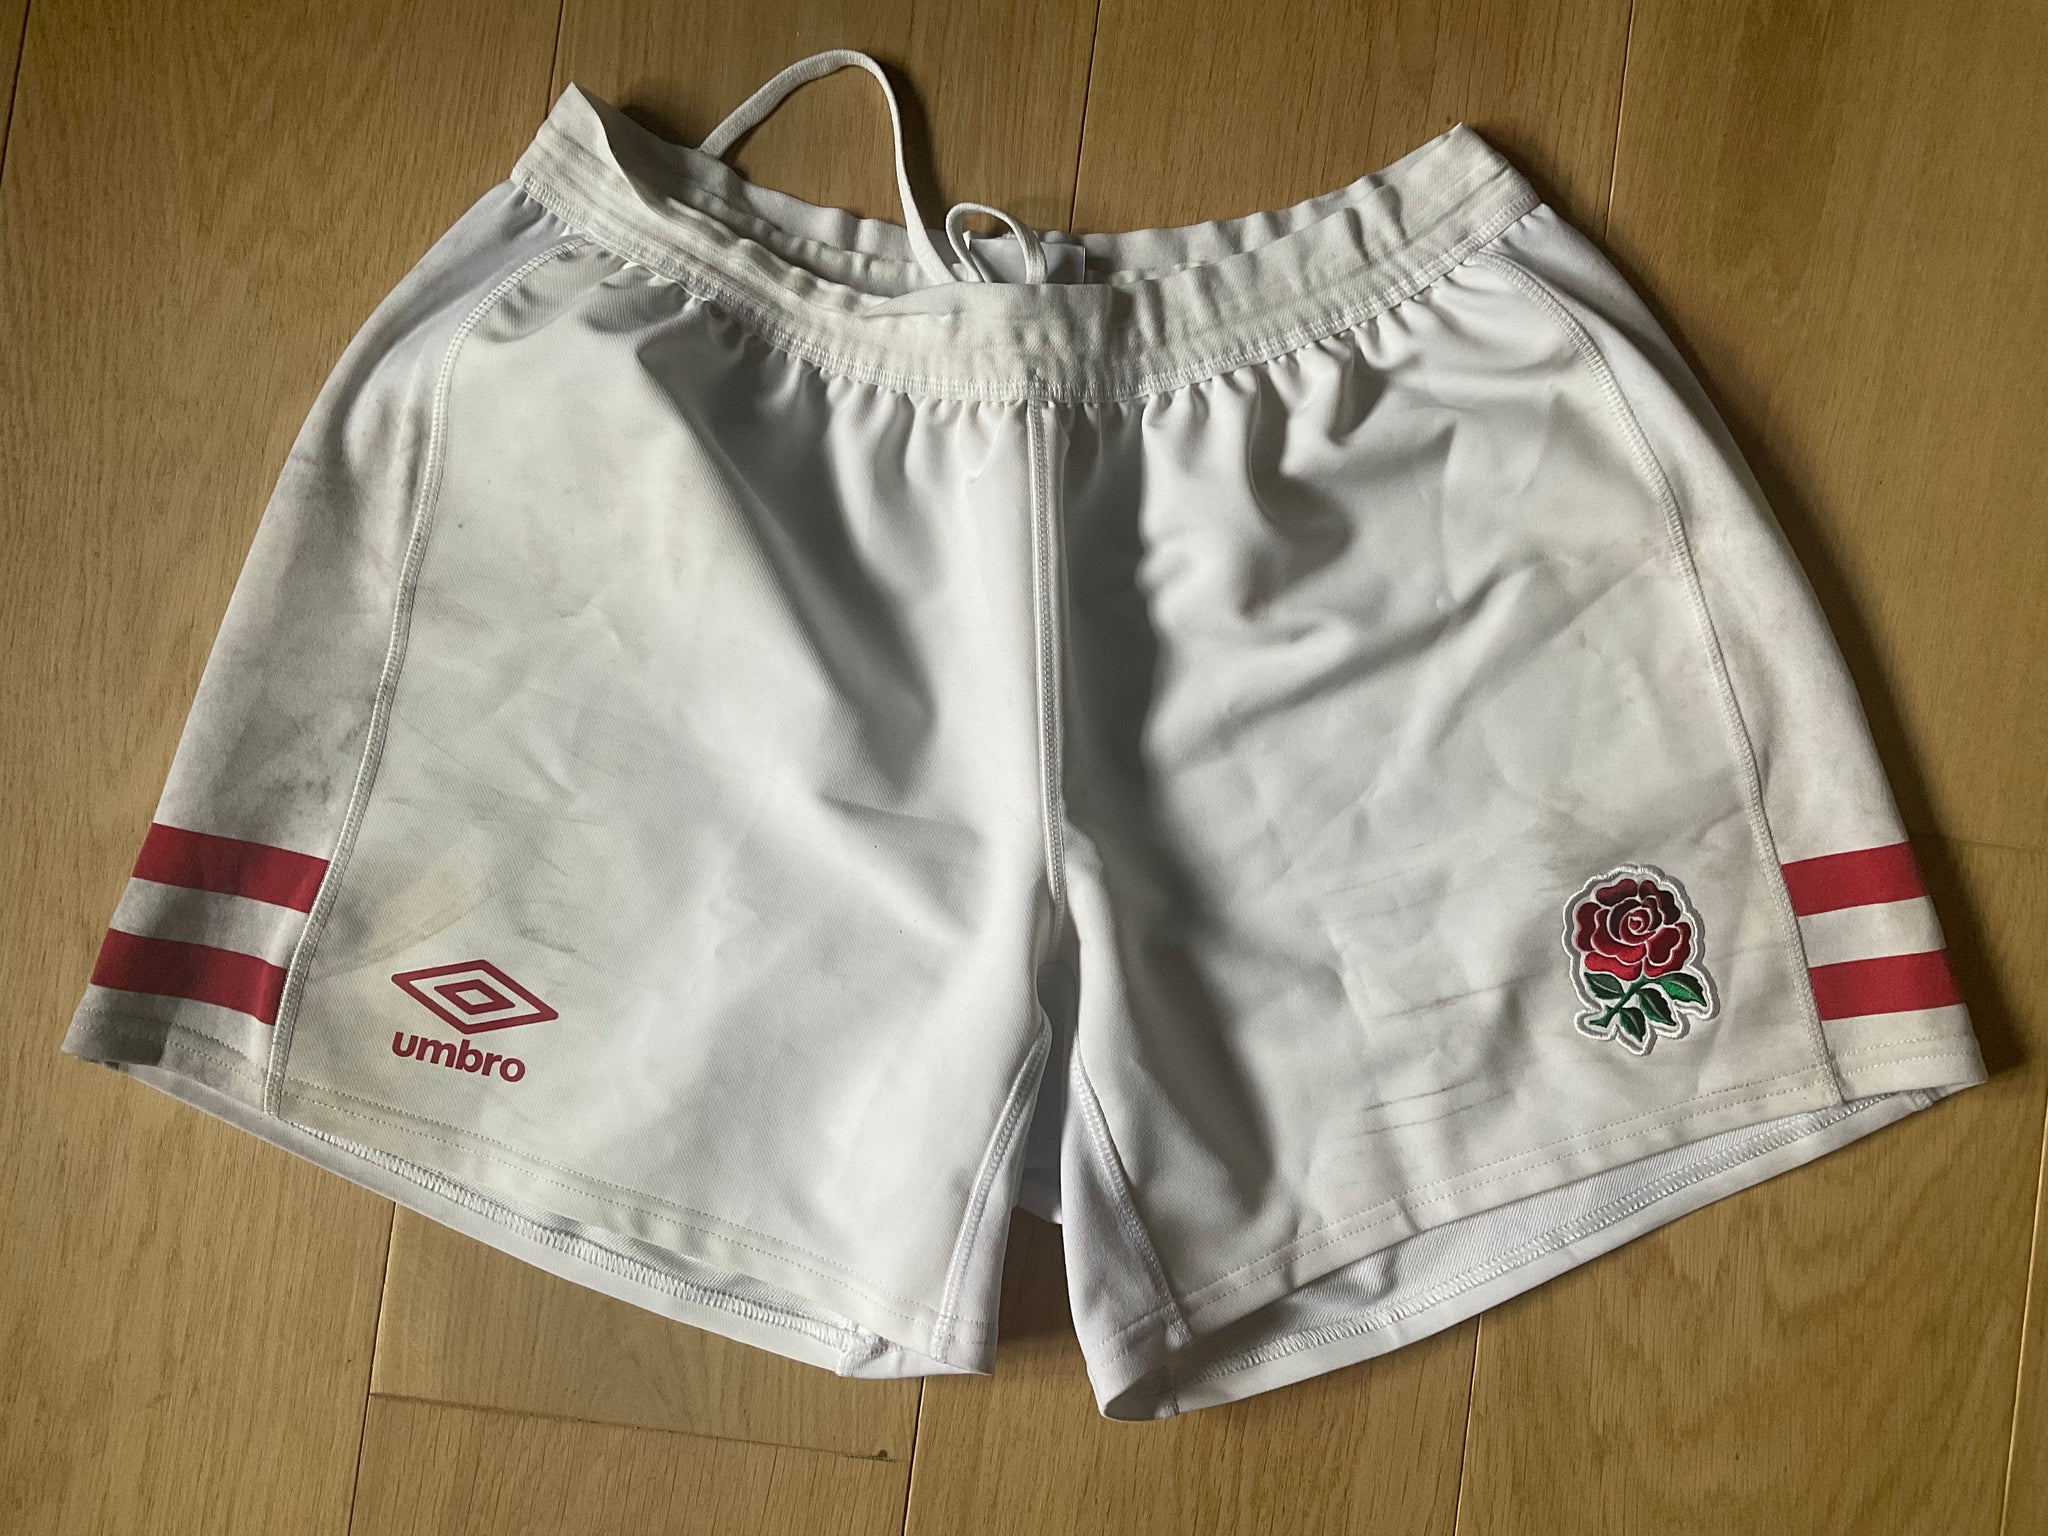 England Rugby - Match Shorts [White & Red]